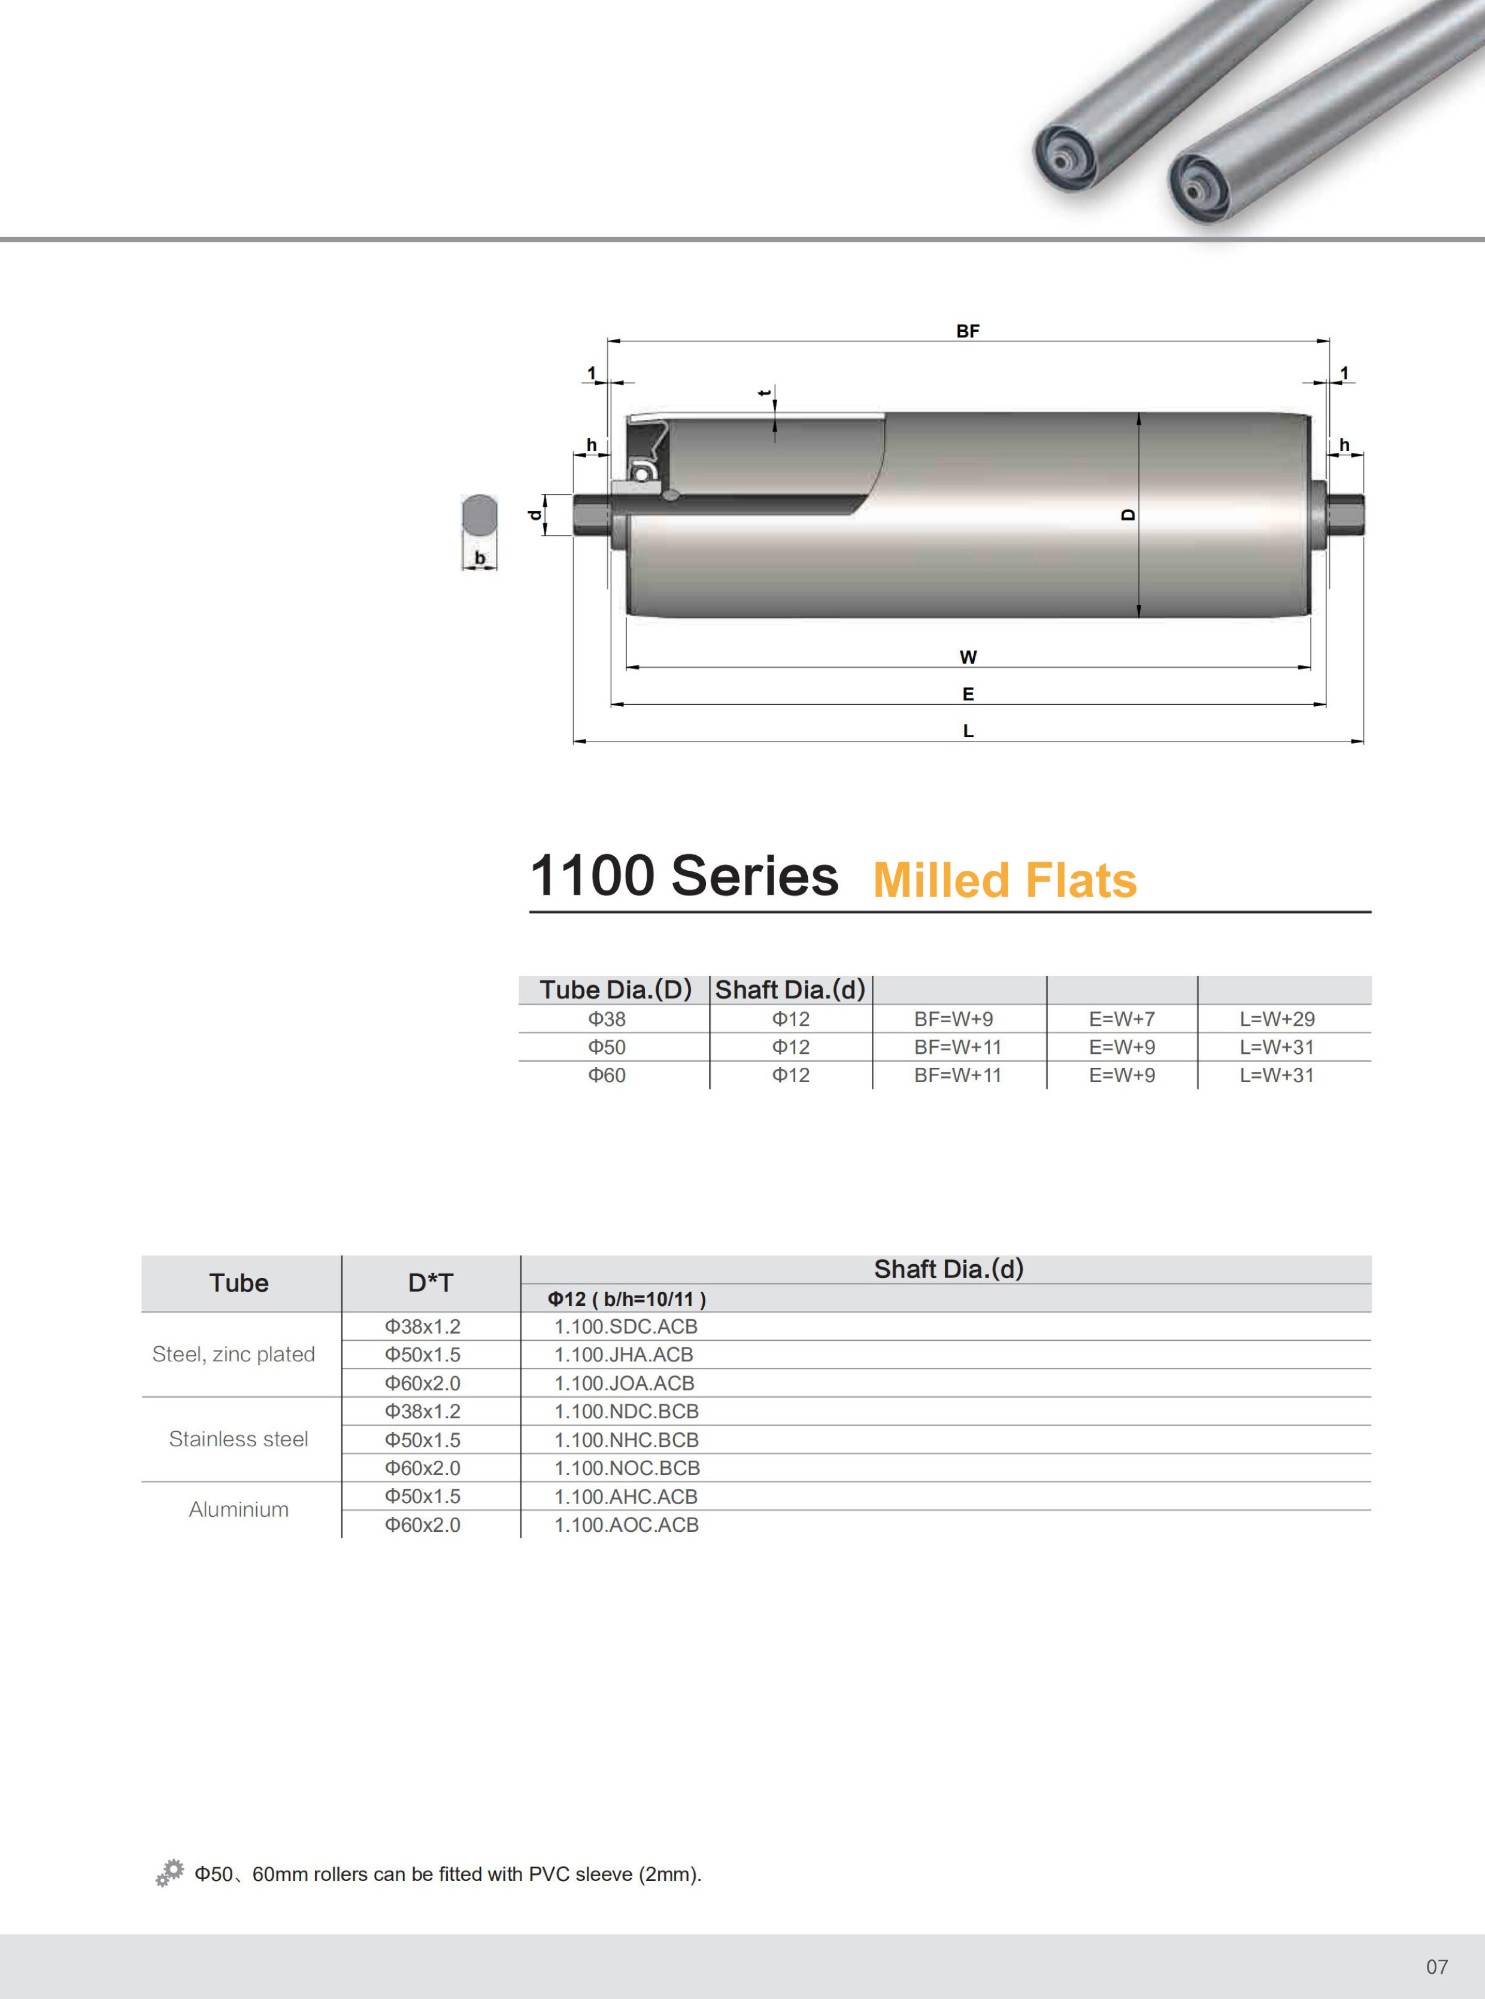 1100 series Milled Flats